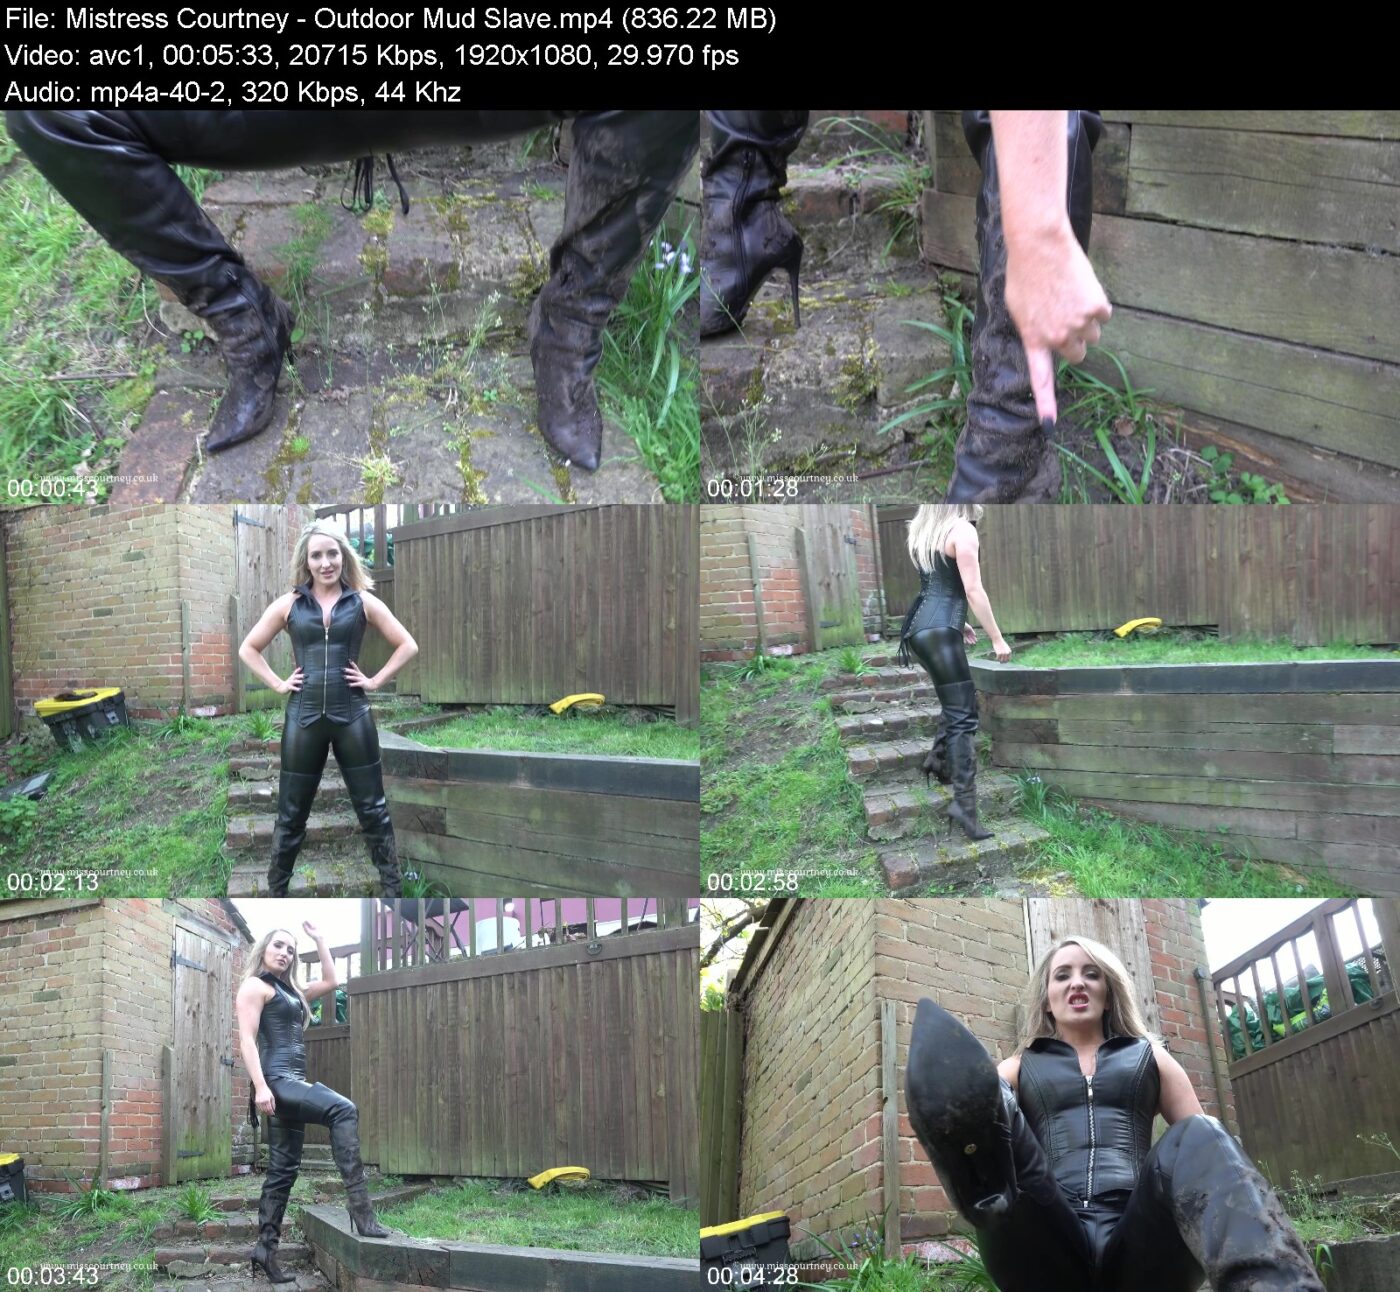 Actress: Mistress Courtney. Title and Studio: Outdoor Mud Slave